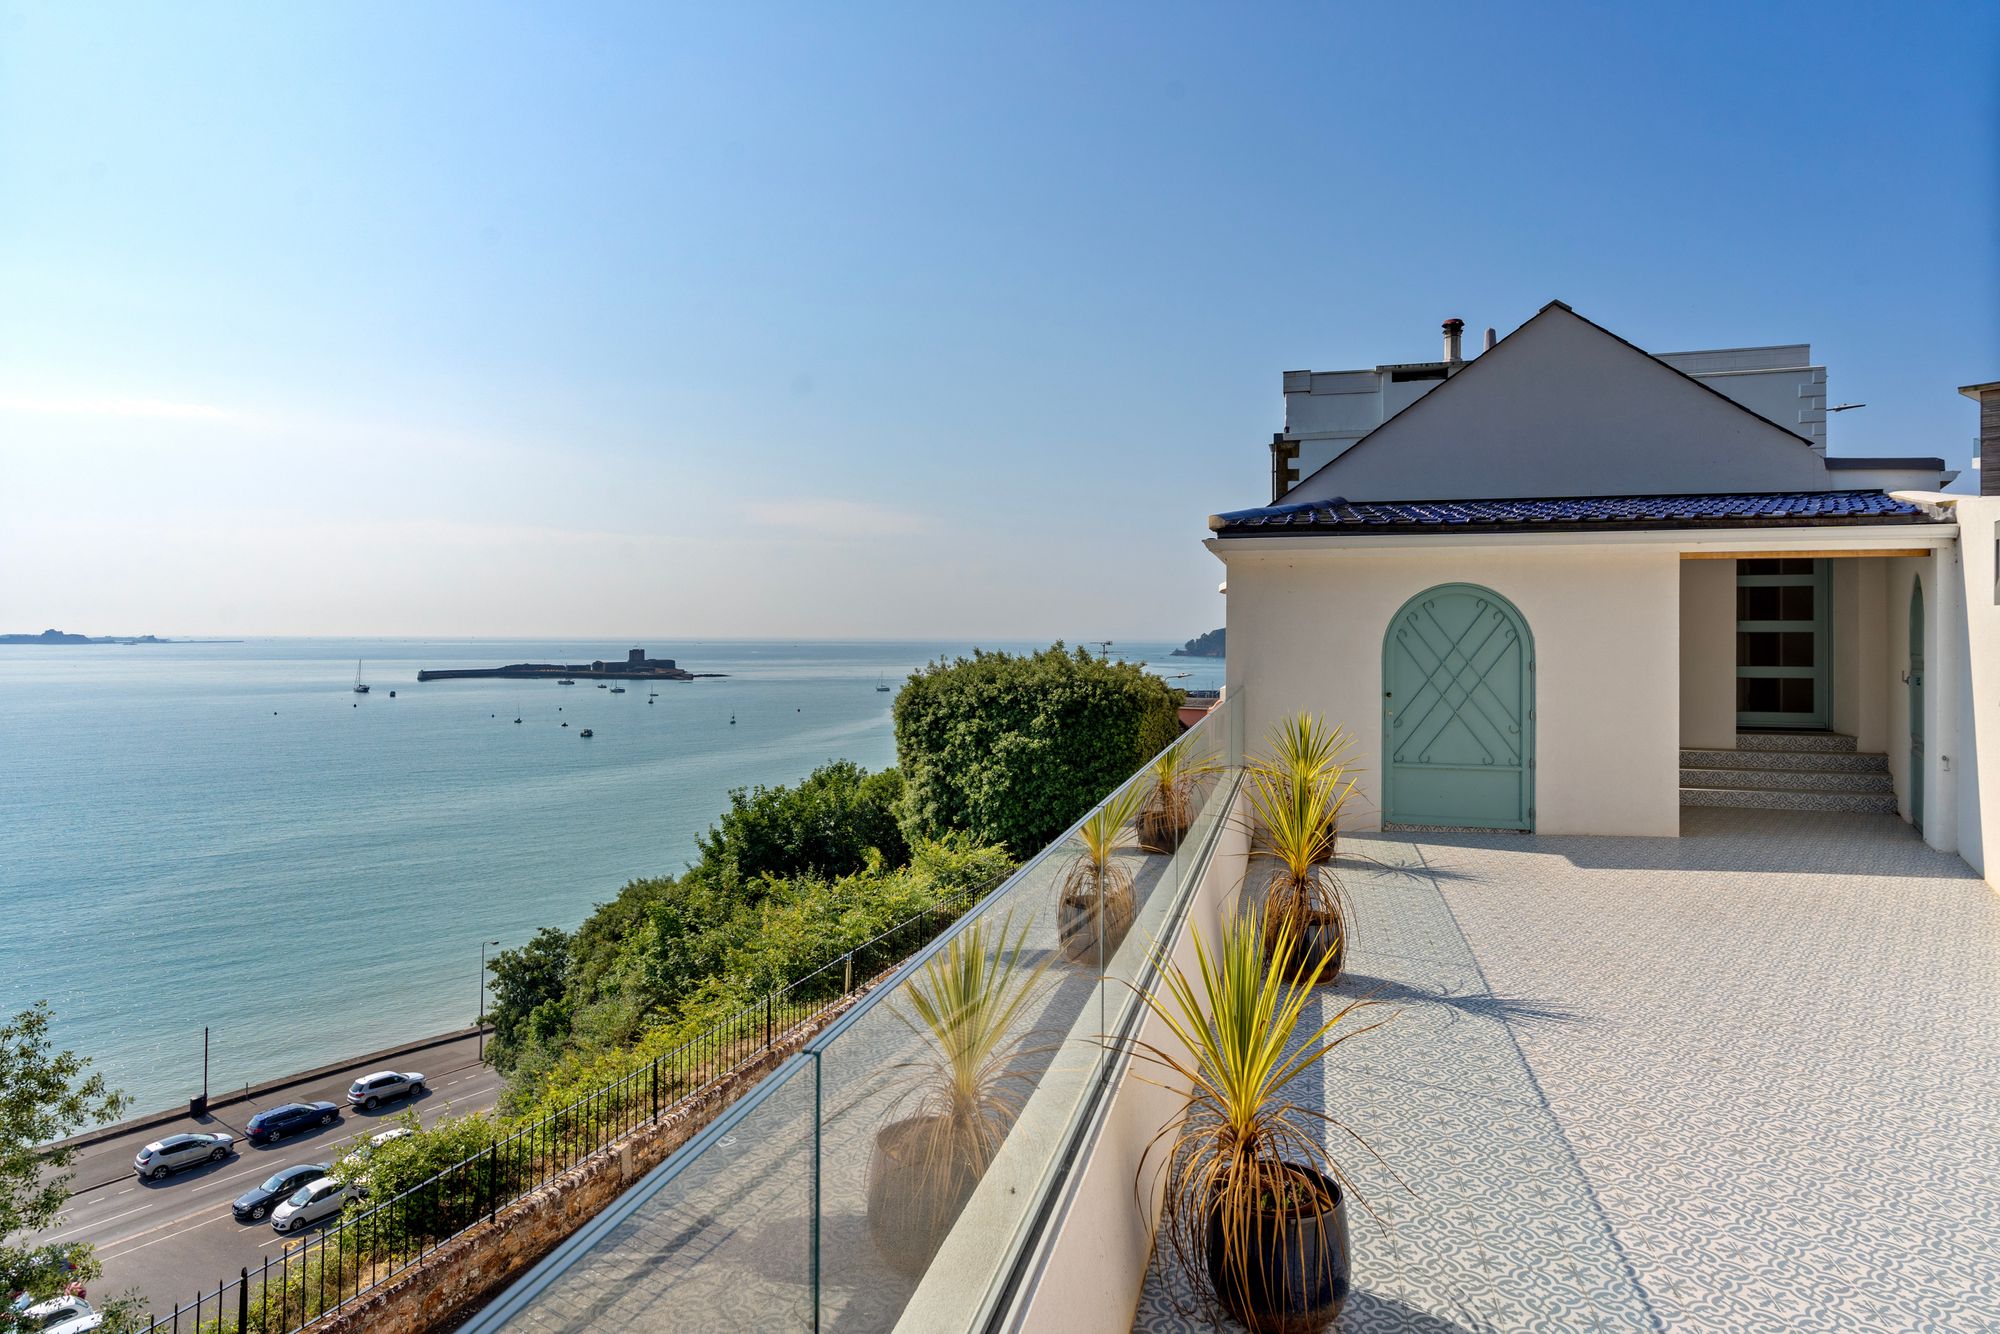 4 bed Property For Rent in St. Brelade, Jersey